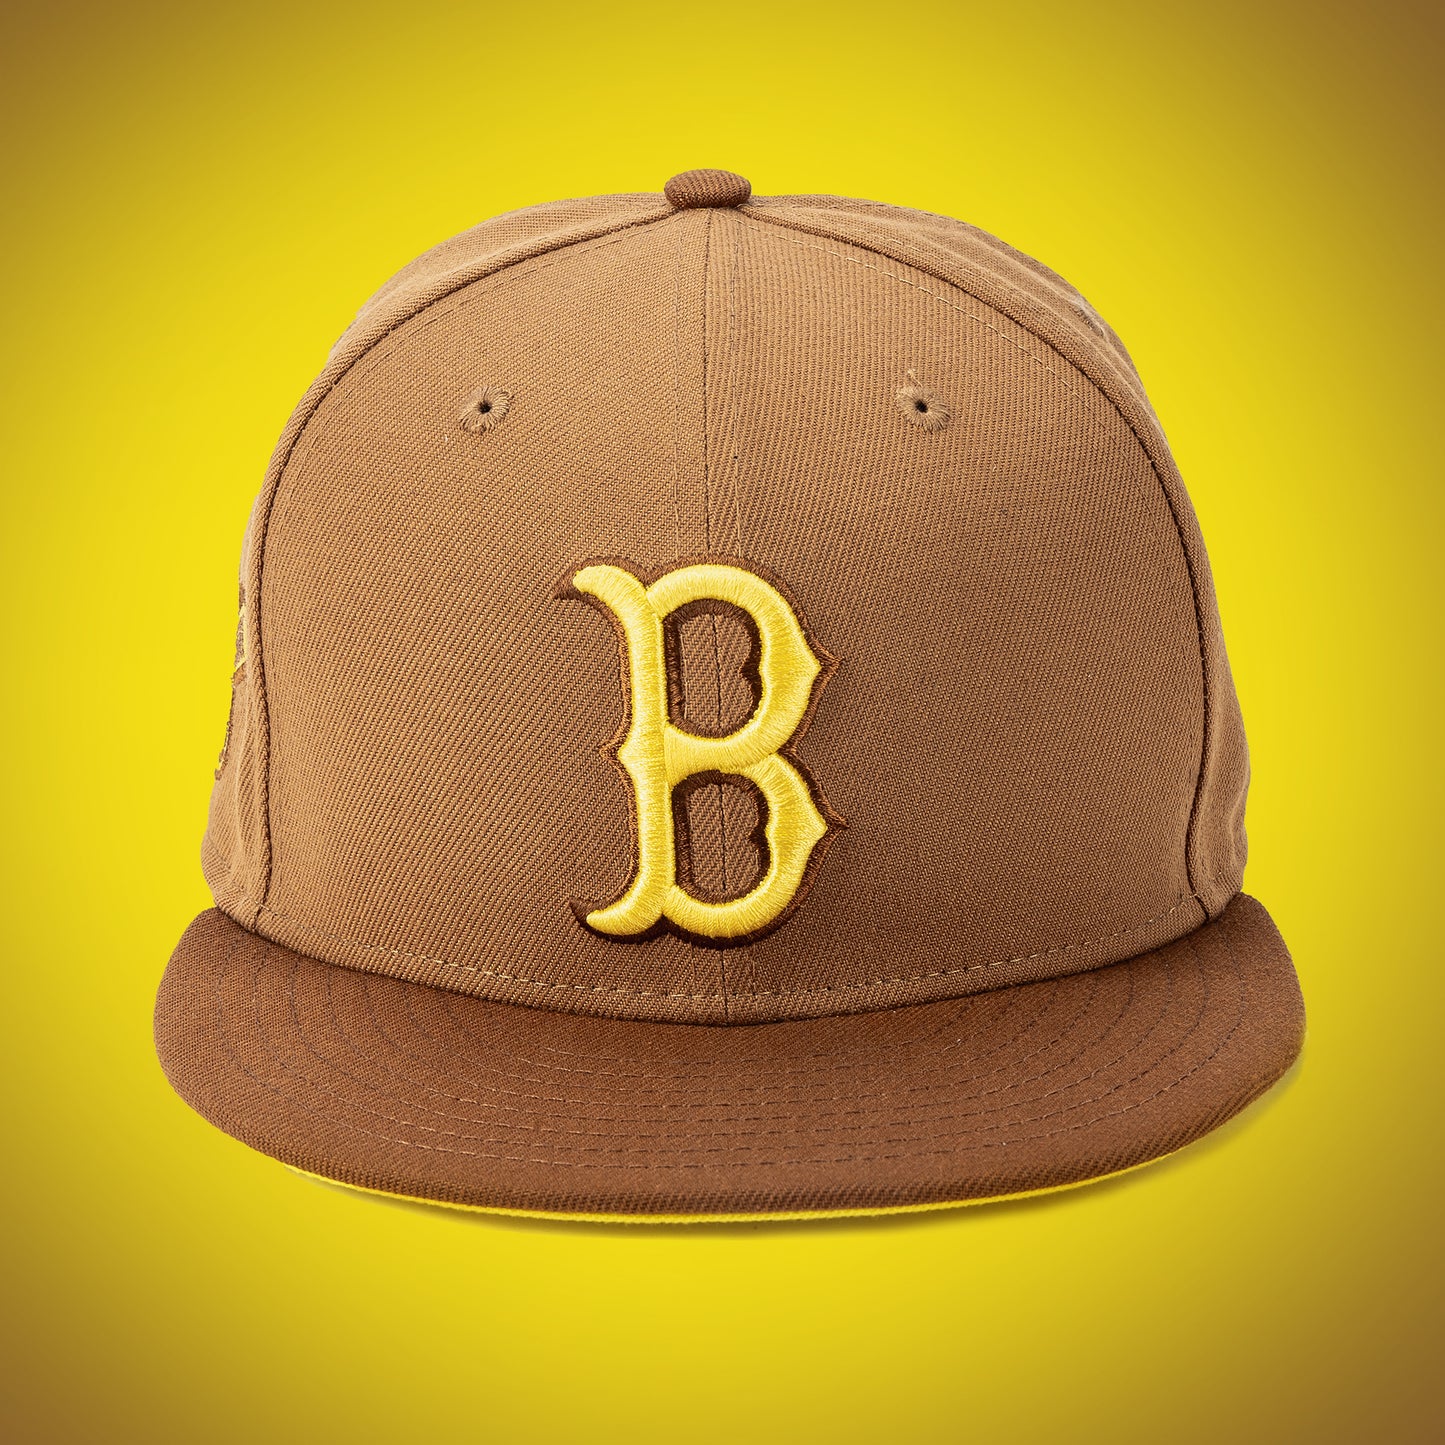 BOSTON RED SOX "LIGHT BRONZE/PEANUT" NEW ERA 59FIFTY FITTED HAT